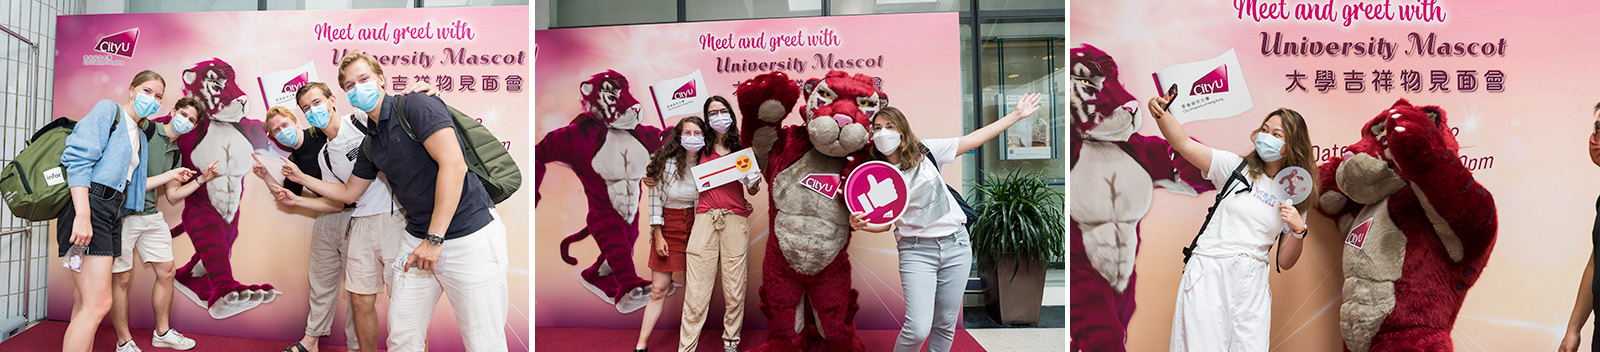 Students and staff grab the chance to take photos with the Mascot.